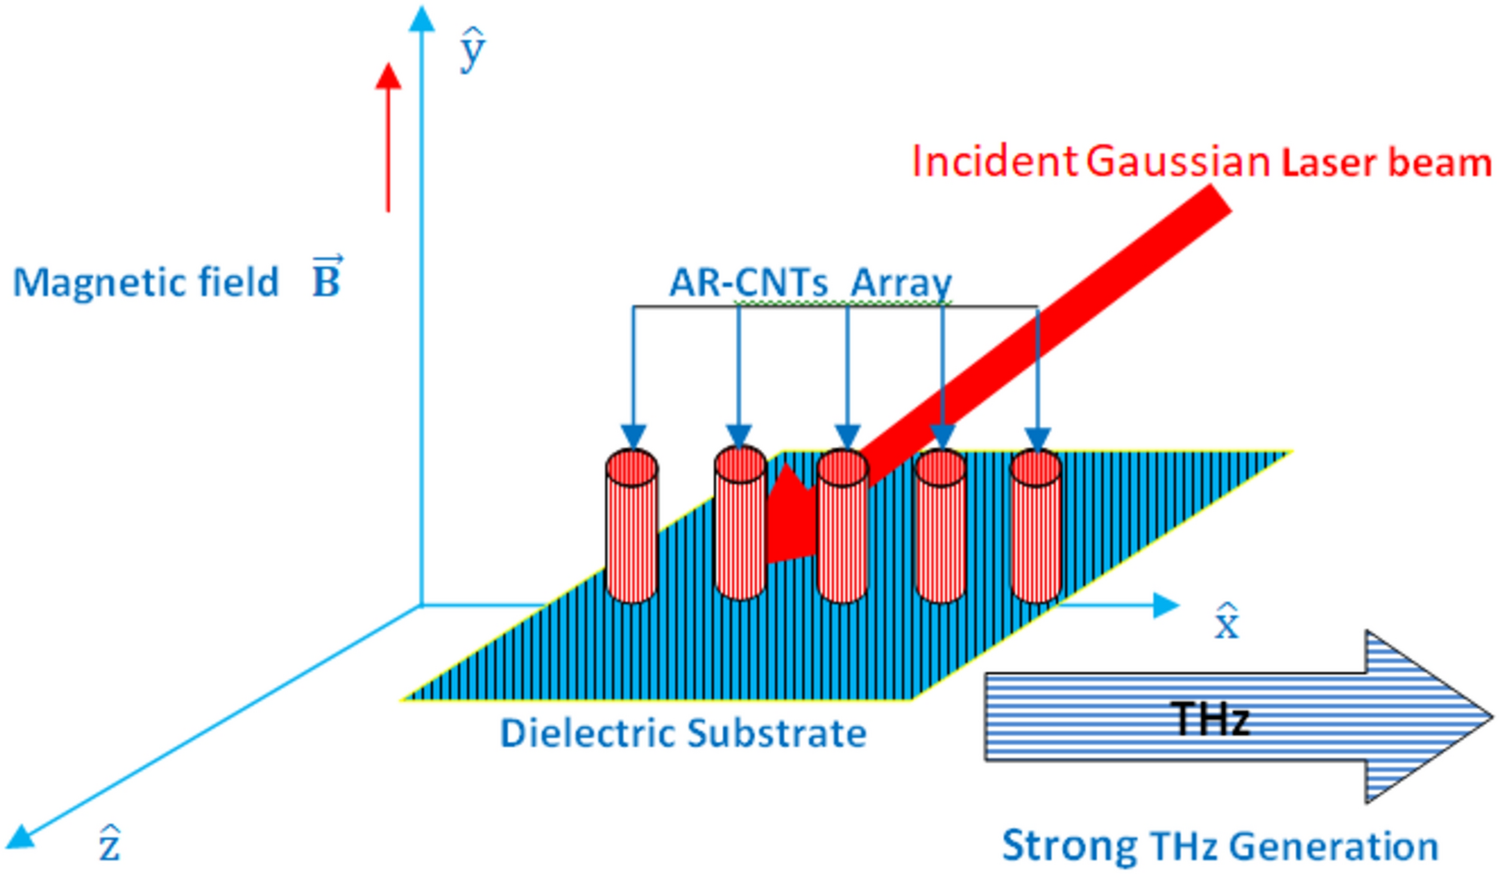 Magnetic field enhanced strong THz generation by the array of AR-CNTs